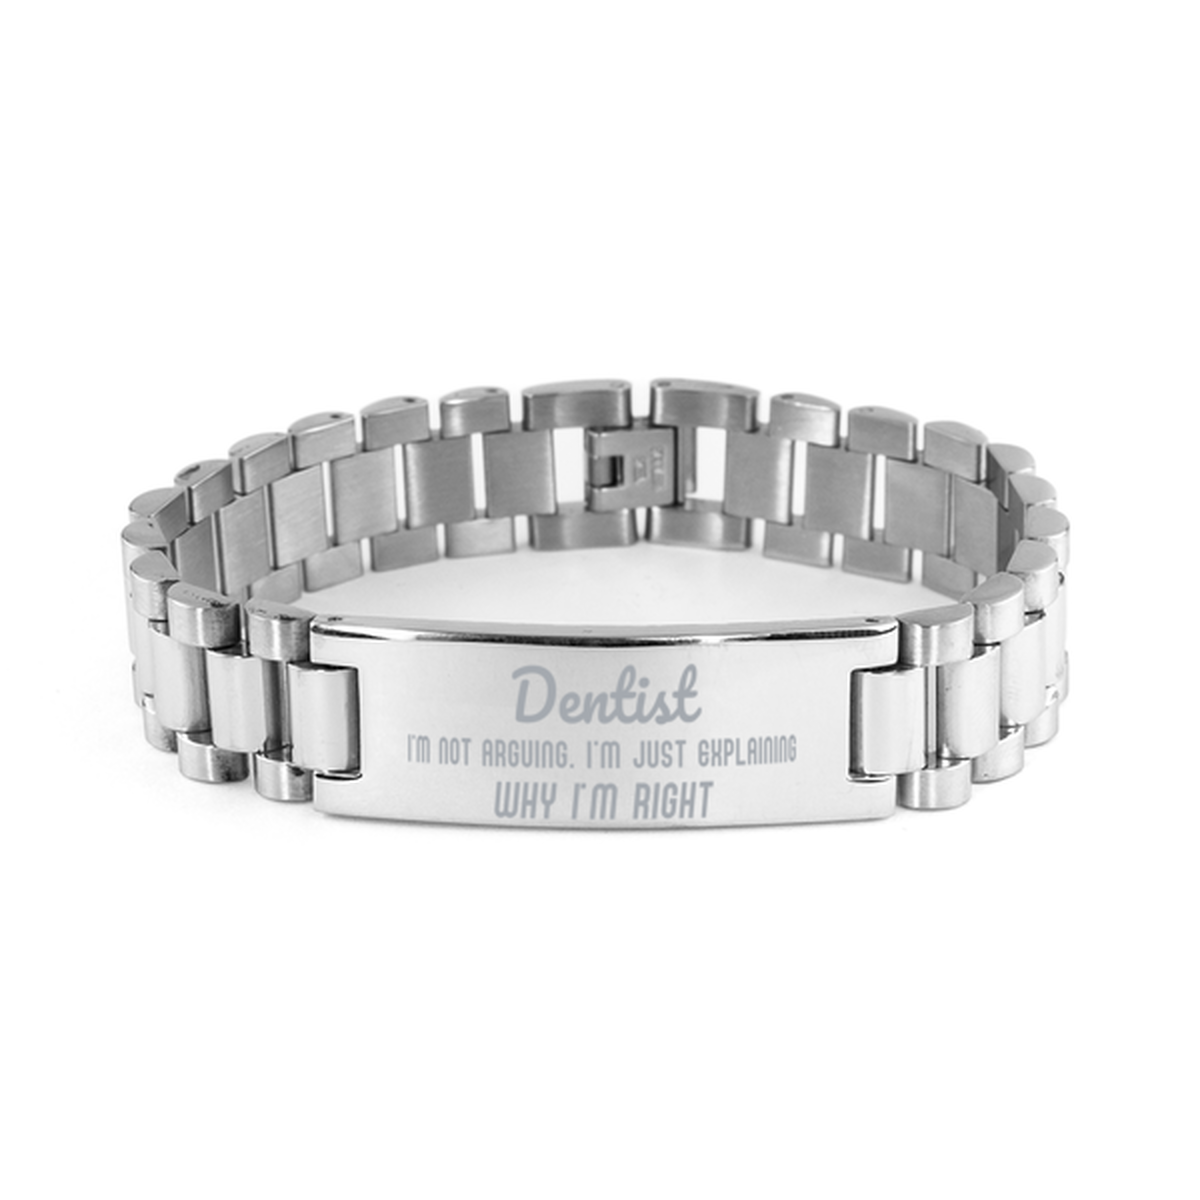 Dentist I'm not Arguing. I'm Just Explaining Why I'm RIGHT Ladder Stainless Steel Bracelet, Graduation Birthday Christmas Dentist Gifts For Dentist Funny Saying Quote Present for Men Women Coworker